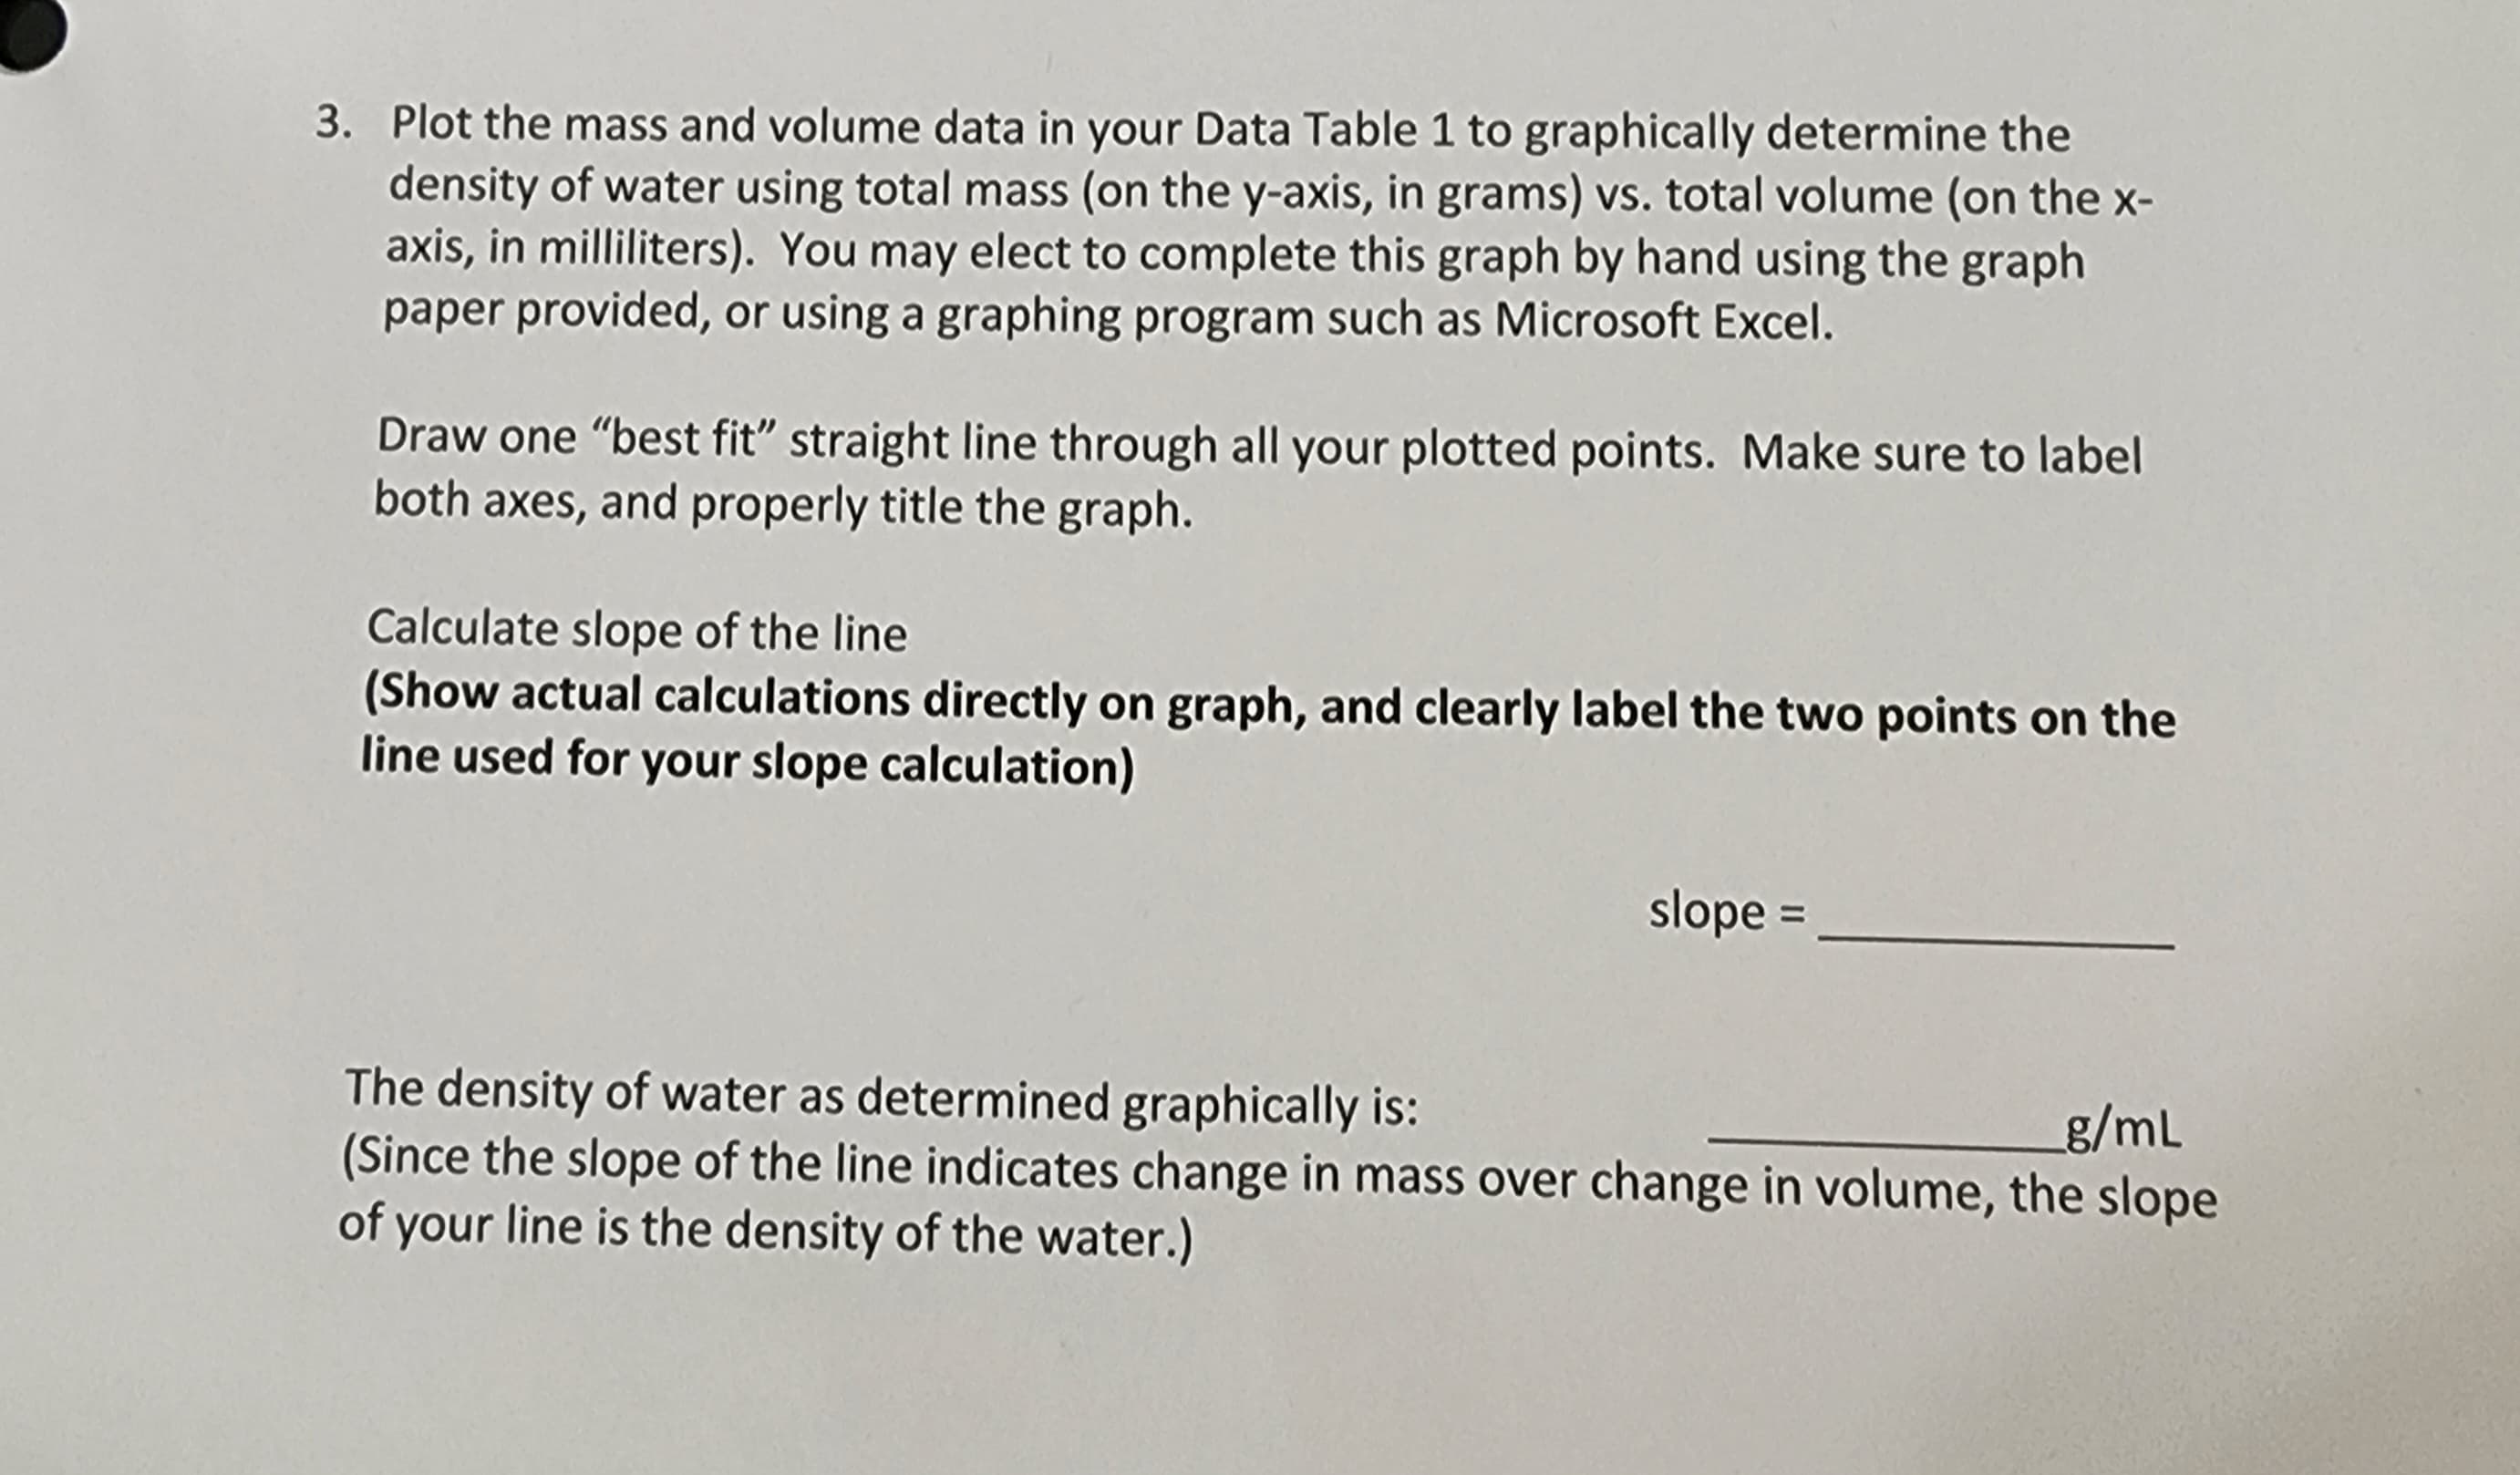 3. Plot the mass and volume data in your Data Table 1 to graphically determine the
density of water using total mass (on the y-axis, in grams) vs. total volume (on the x-
axis, in milliliters). You may elect to complete this graph by hand using the graph
paper provided, or using a graphing program such as Microsoft Excel.
Draw one "best fit" straight line through all your plotted points. Make sure to label
both axes, and properly title the graph.
Calculate slope of the line
(Show actual calculations directly on graph, and clearly label the two points on the
line used for your slope calculation)
slope =______
The density of water as determined graphically is:
_g/mL
(Since the slope of the line indicates change in mass over change in volume, the slope
of your line is the density of the water.)